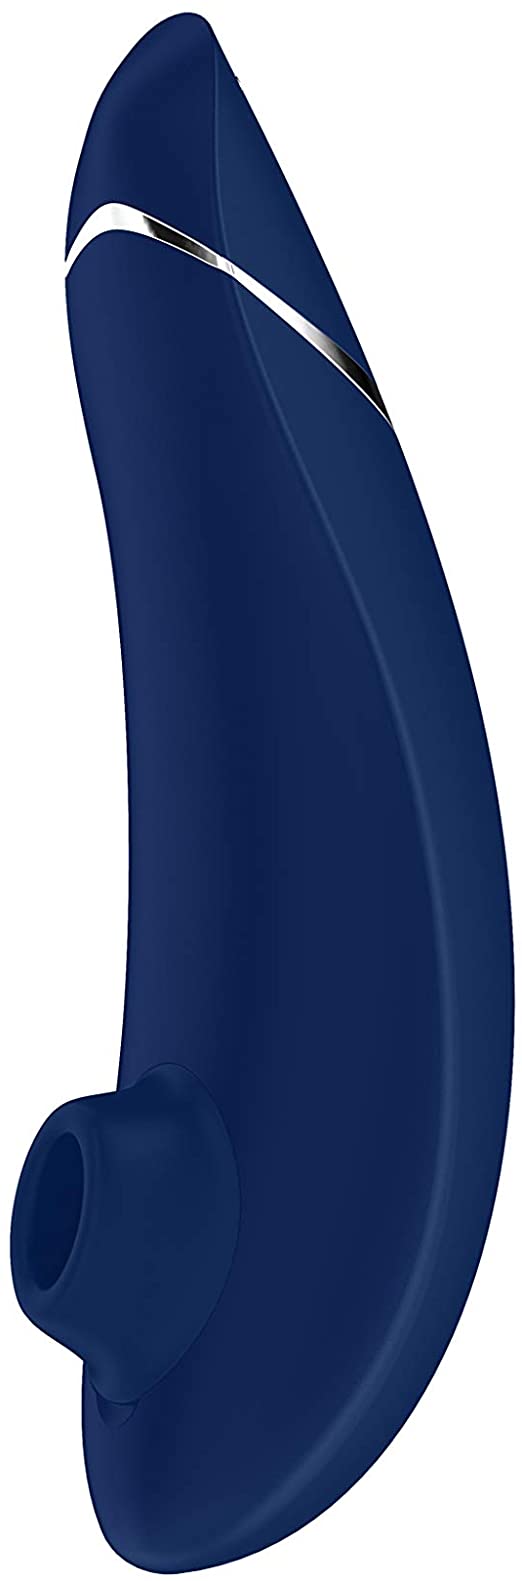 Womanizer Premium - Clitoral Sucking Toy Clitoris Vibrator for Women Waterproof Rechargeable 12 Intensity Levels Auto Pilot with 30ml We-Vibe Lubricant | Blueberry